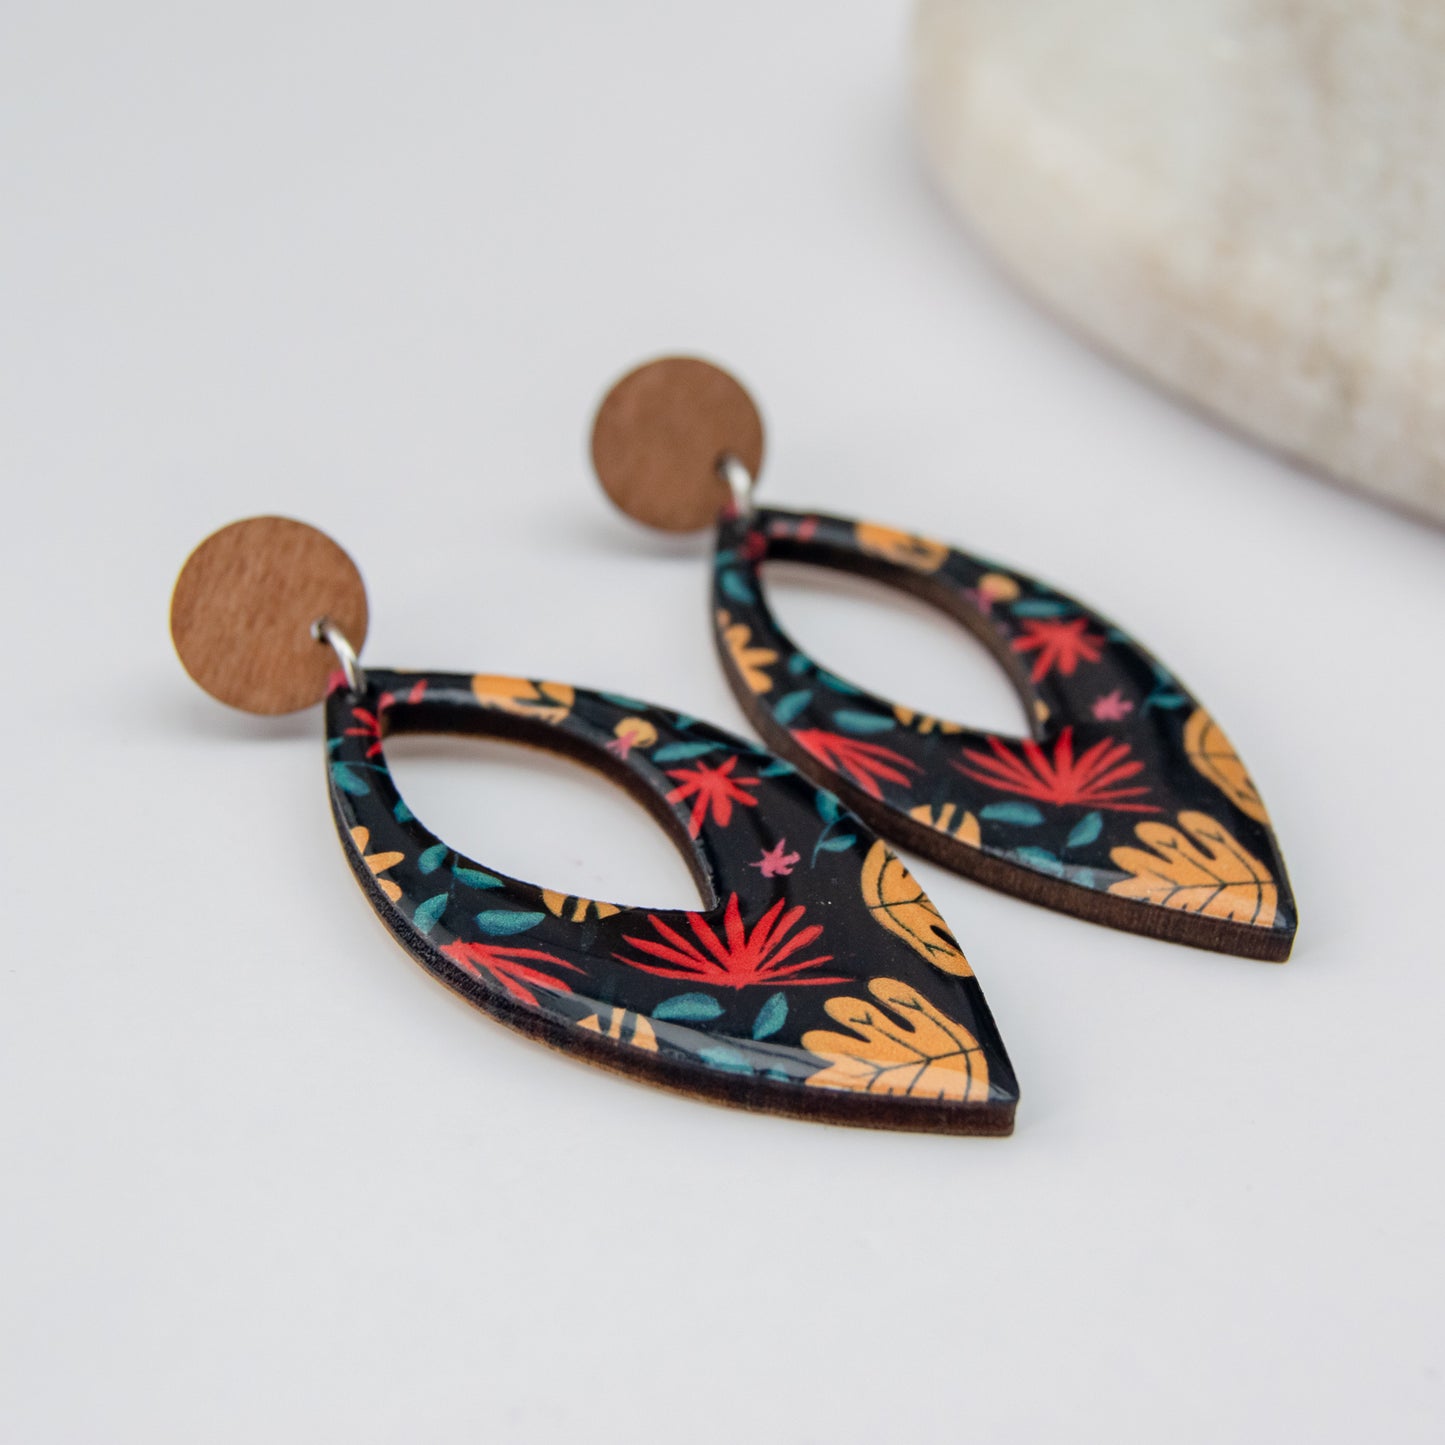 Nina - Wooden statement earrings with cheerful floral print